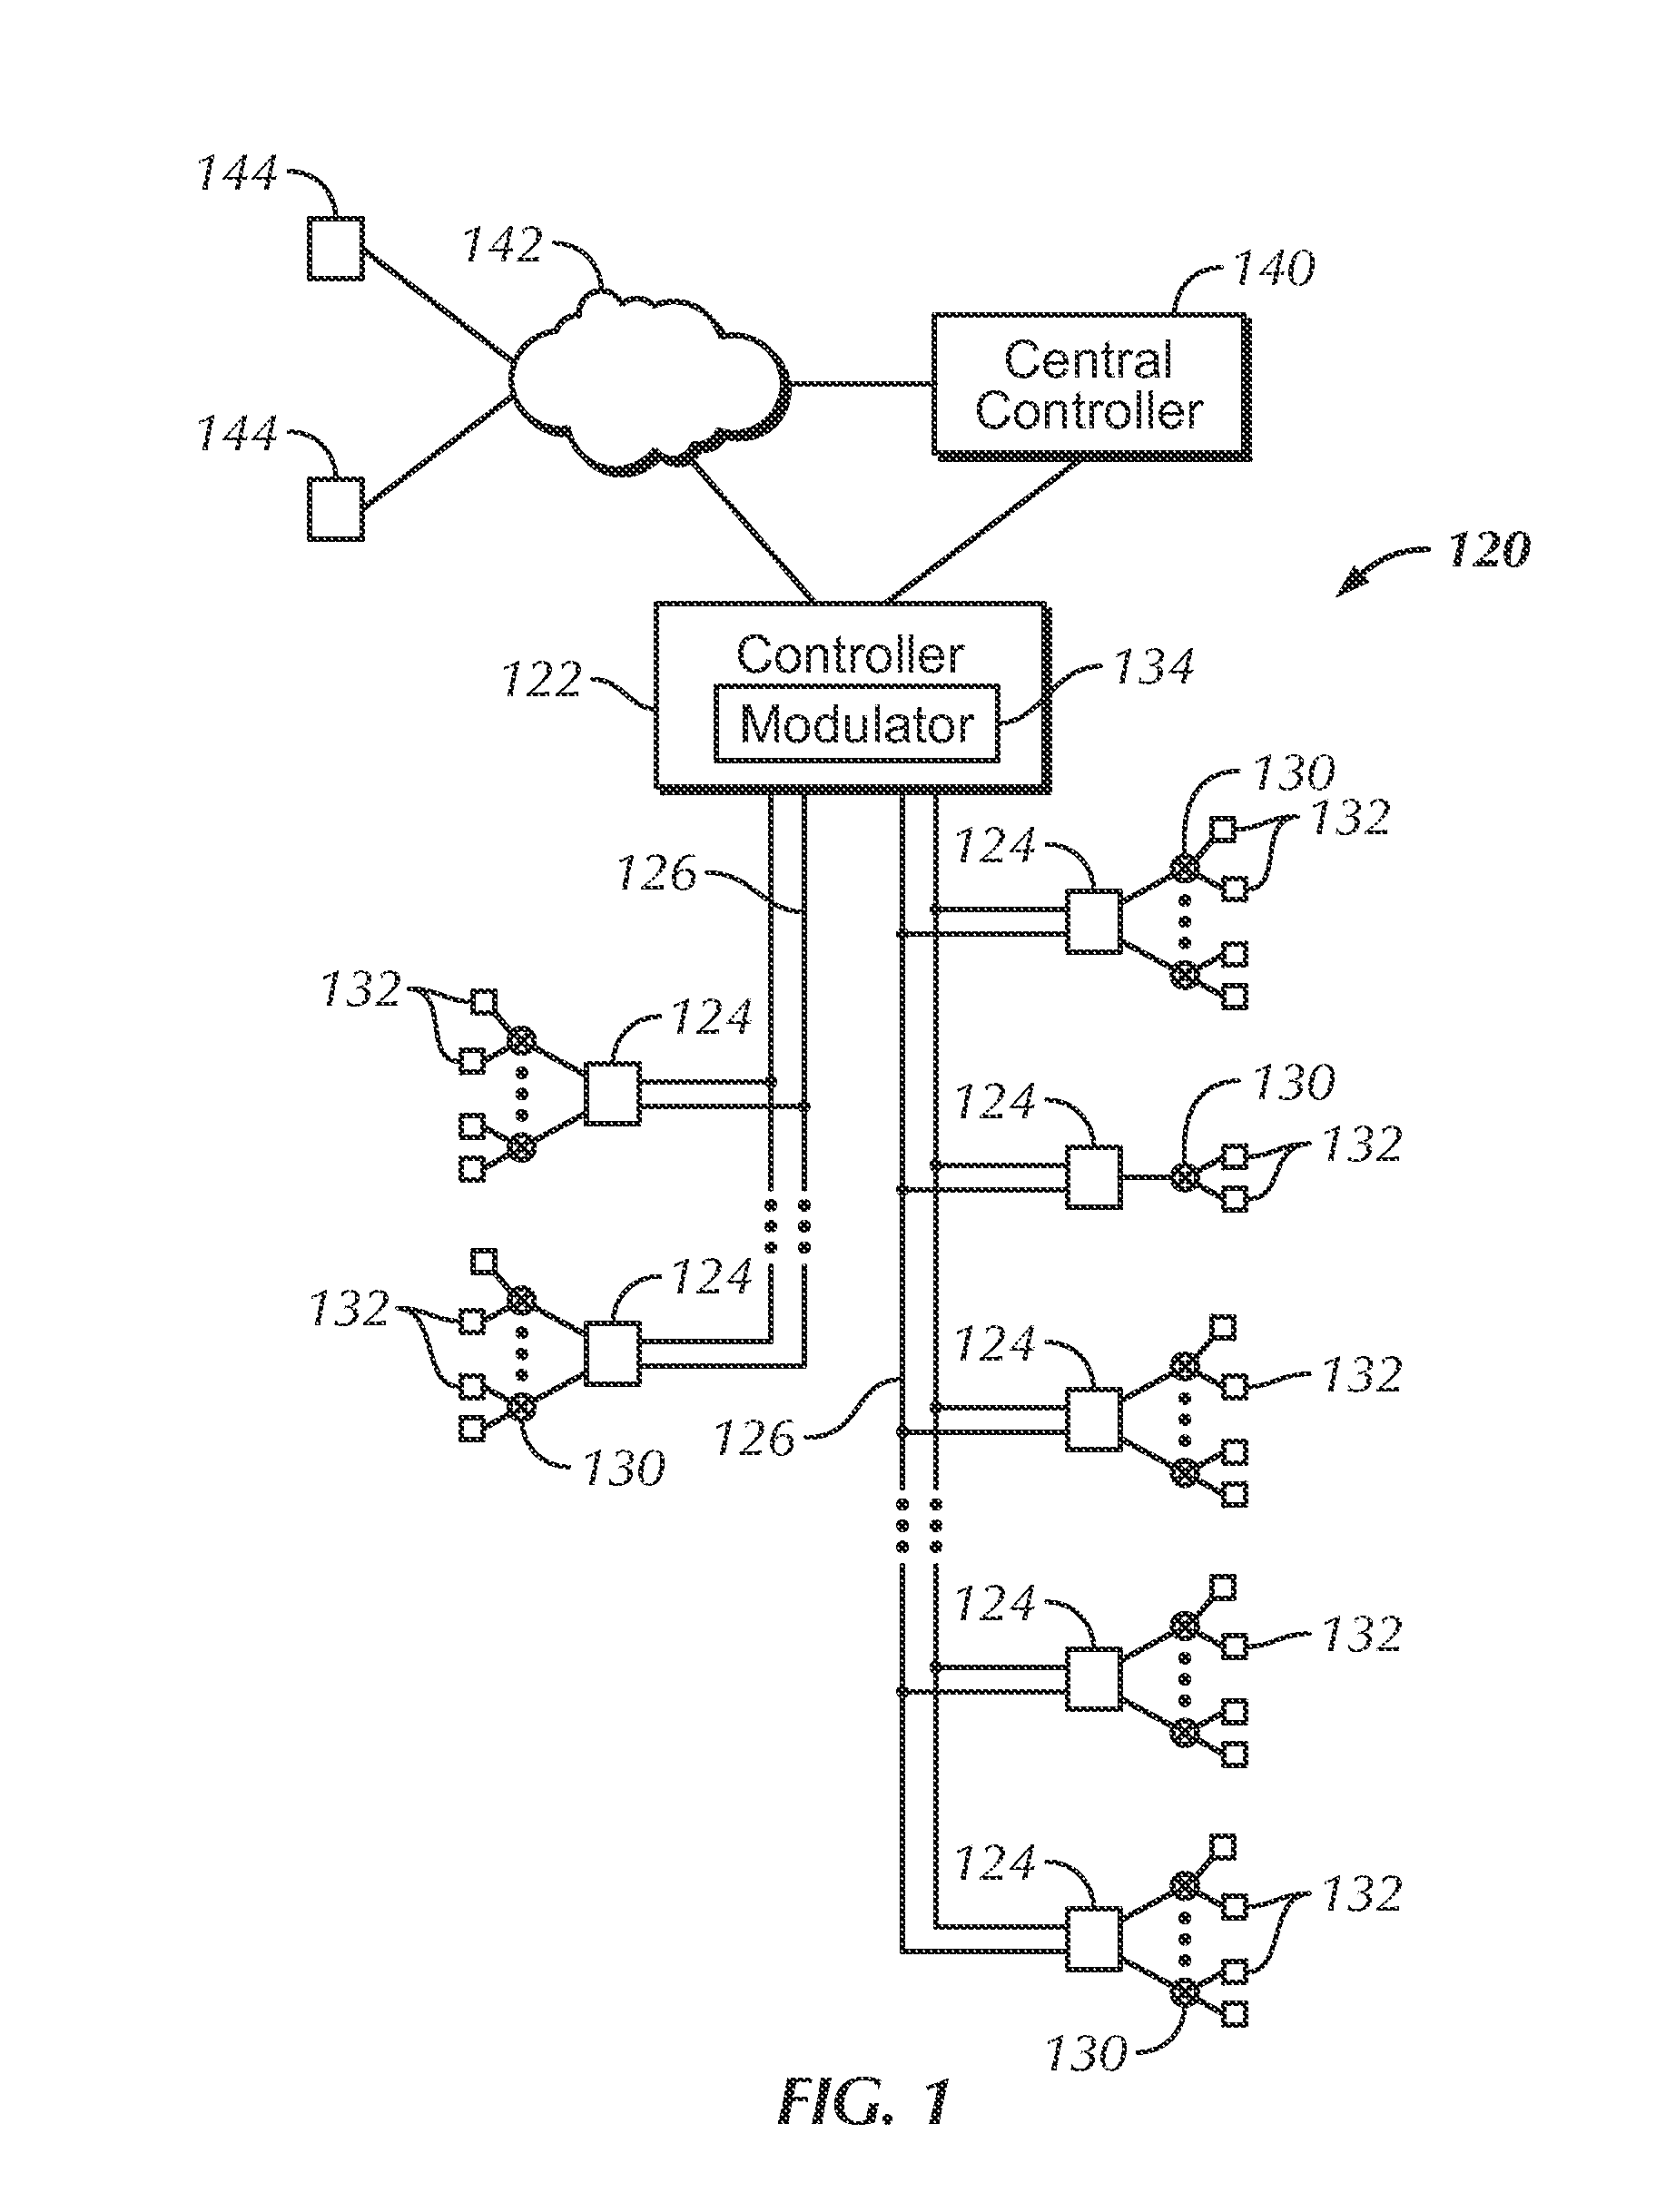 Variable initialization time in the charging of energy reserves in an irrigation control system